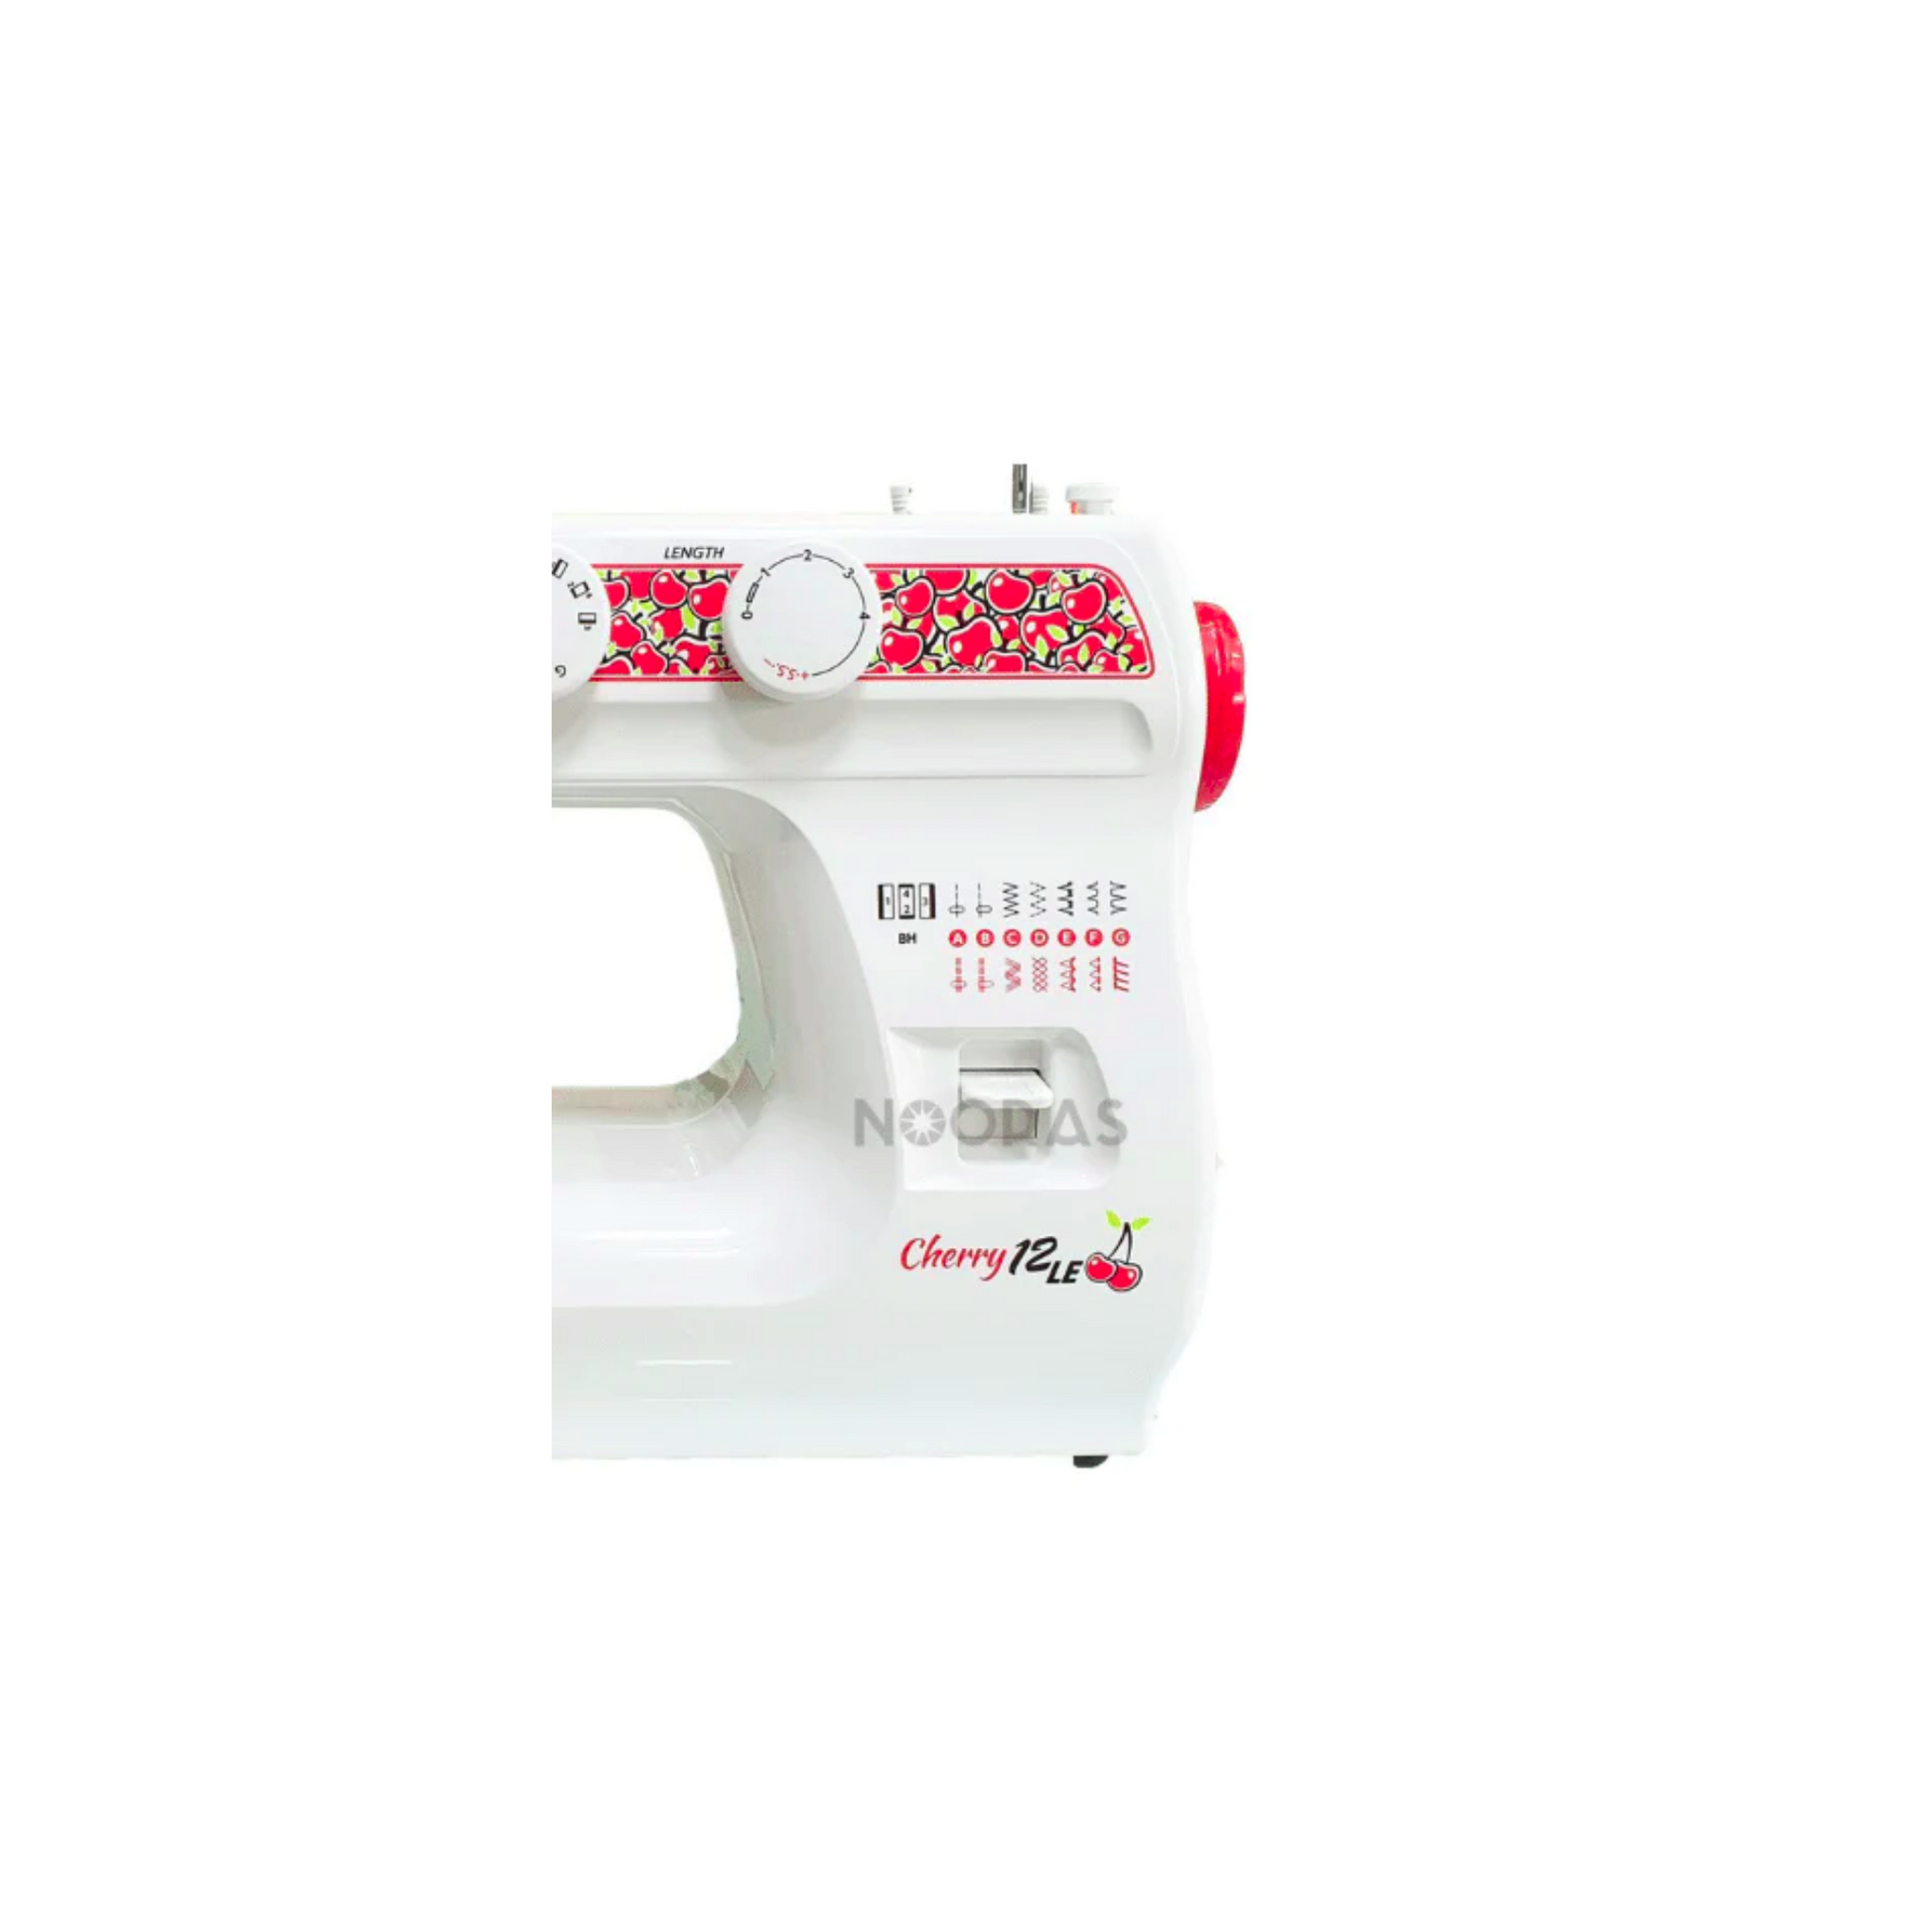 Janome cherry 12LE - Sewing machine - Cherry - Close view